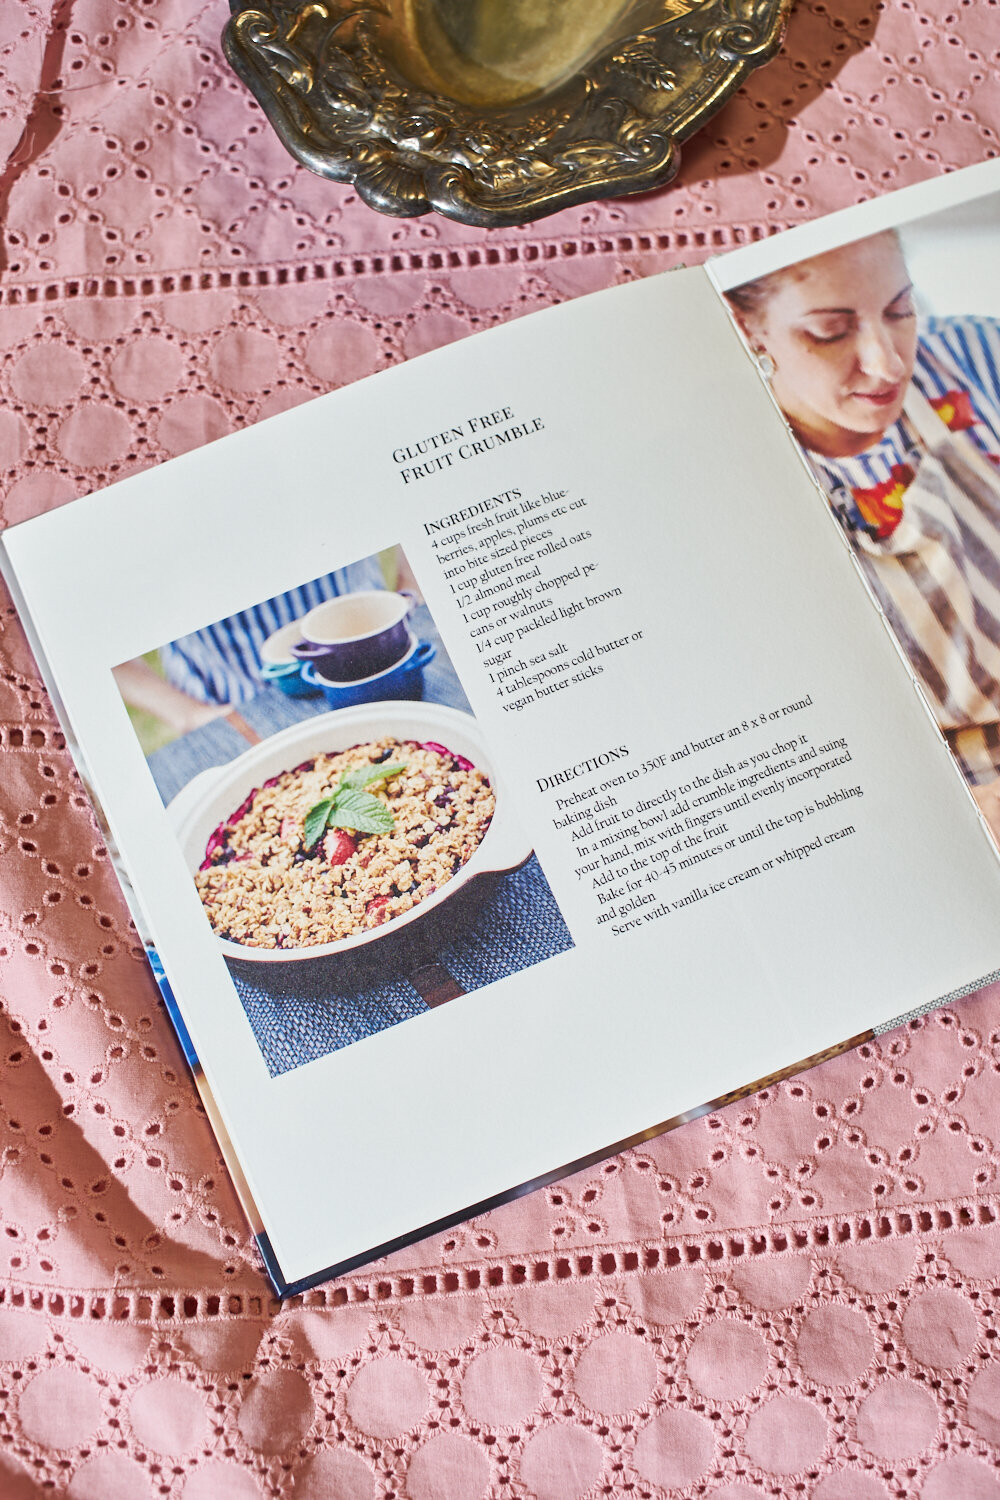 Create a Family Cookbook Online, Share Your Recipes